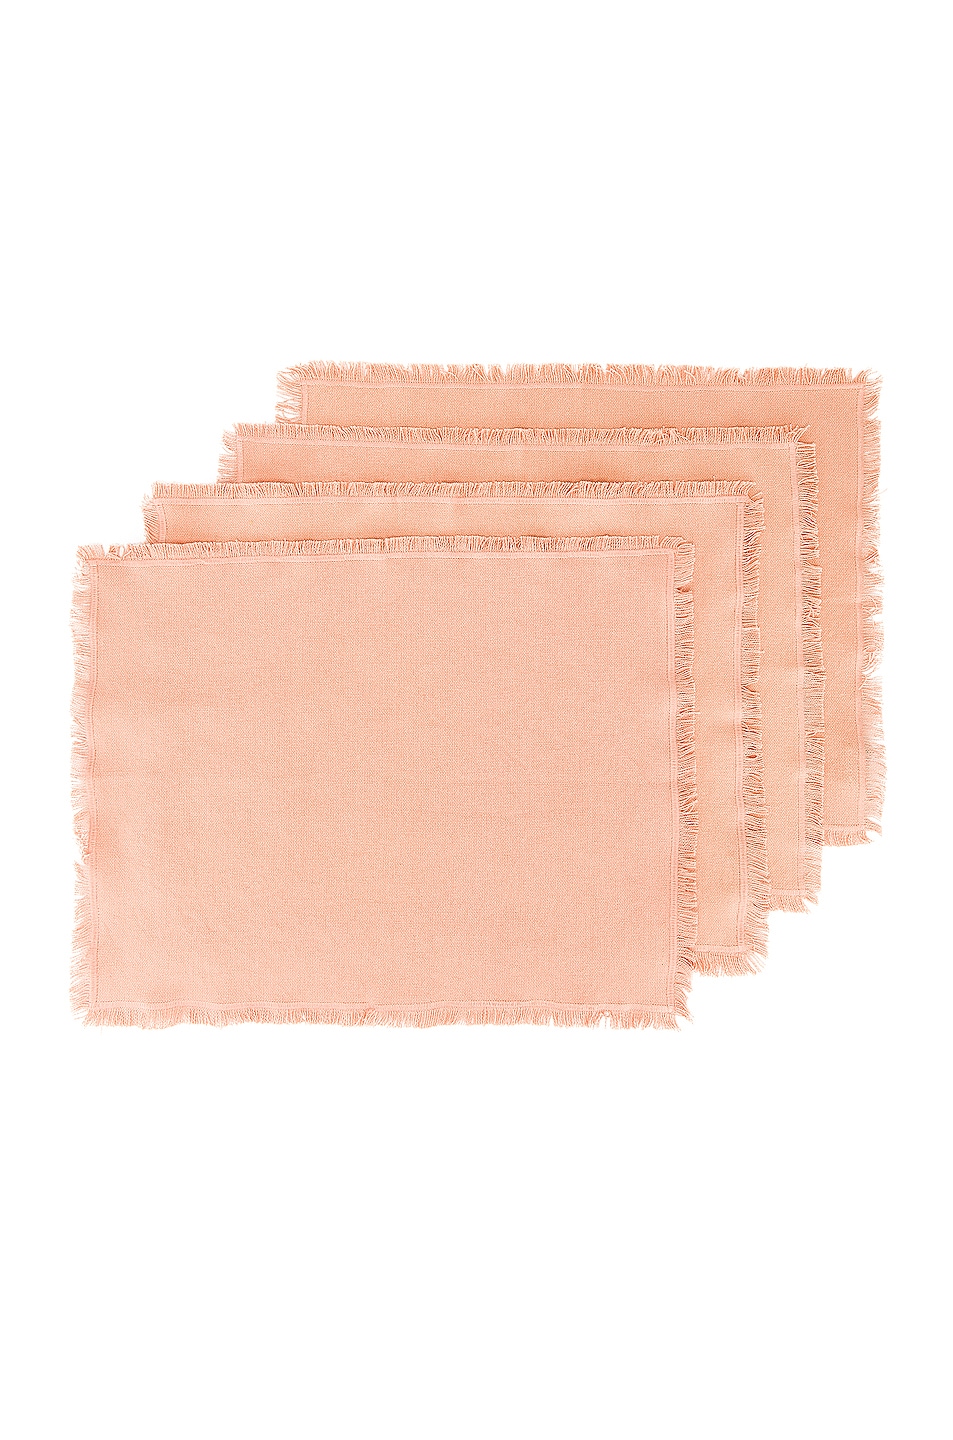 Image 1 of HAWKINS NEW YORK Essential Set of 4 Cotton Placemats in Blush